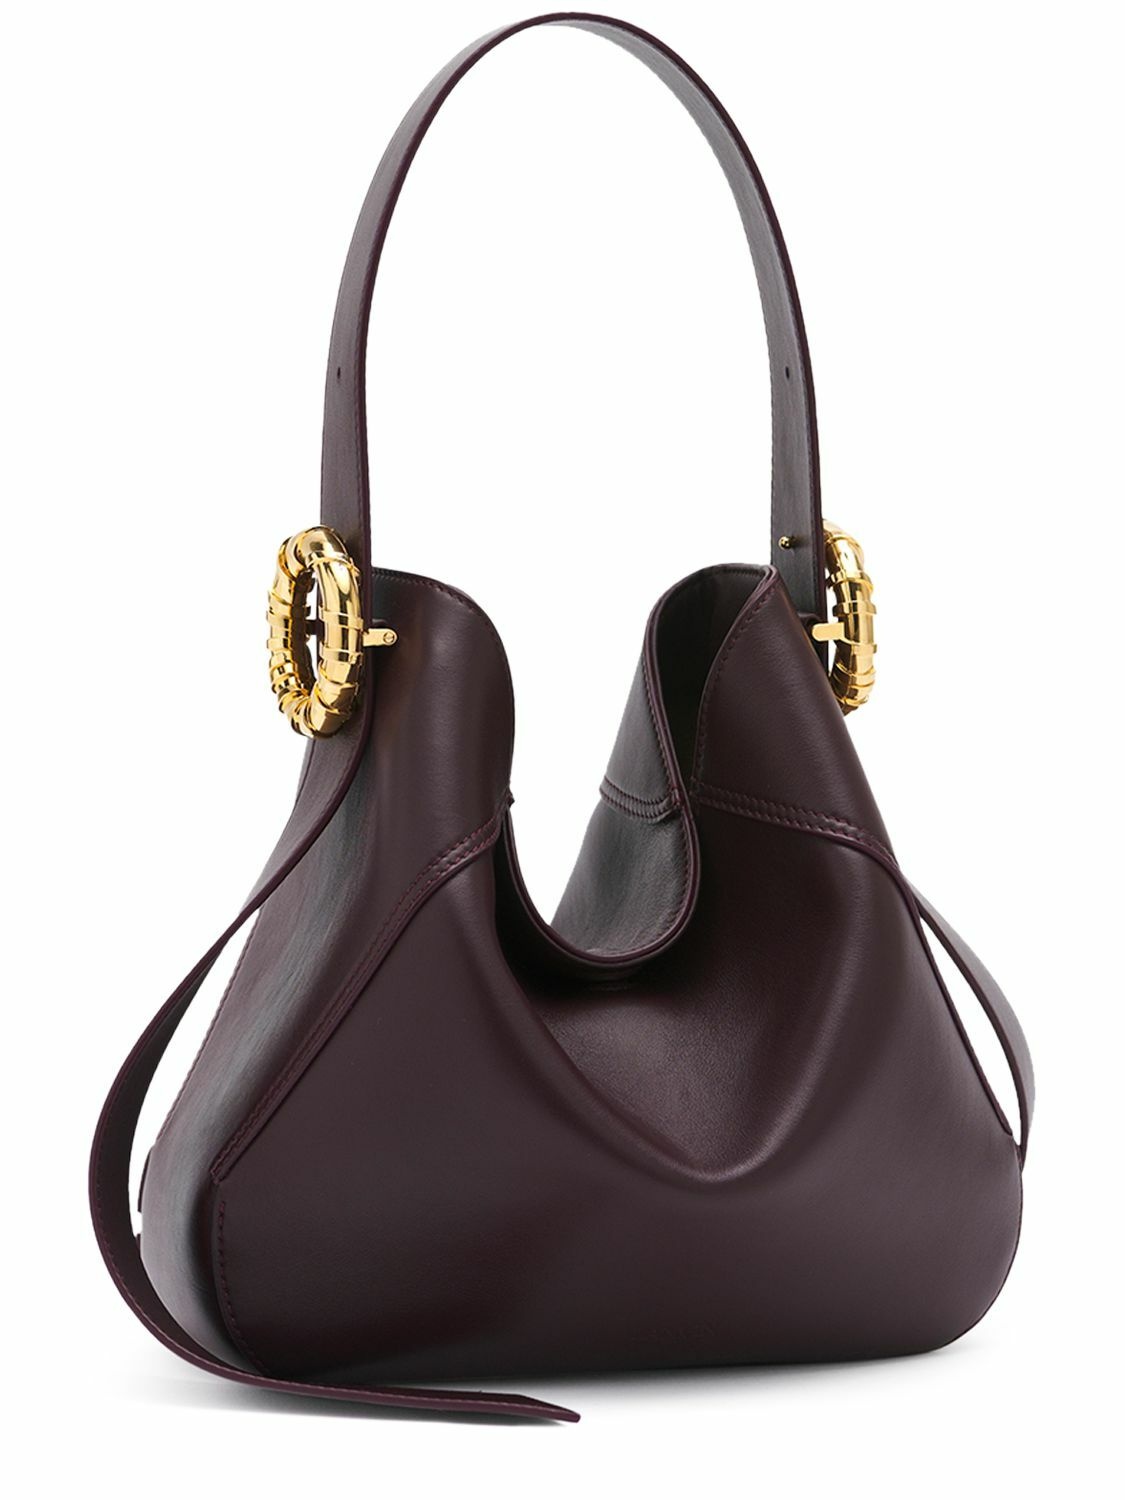 LANVIN - Melodie Leather Hobo Bag